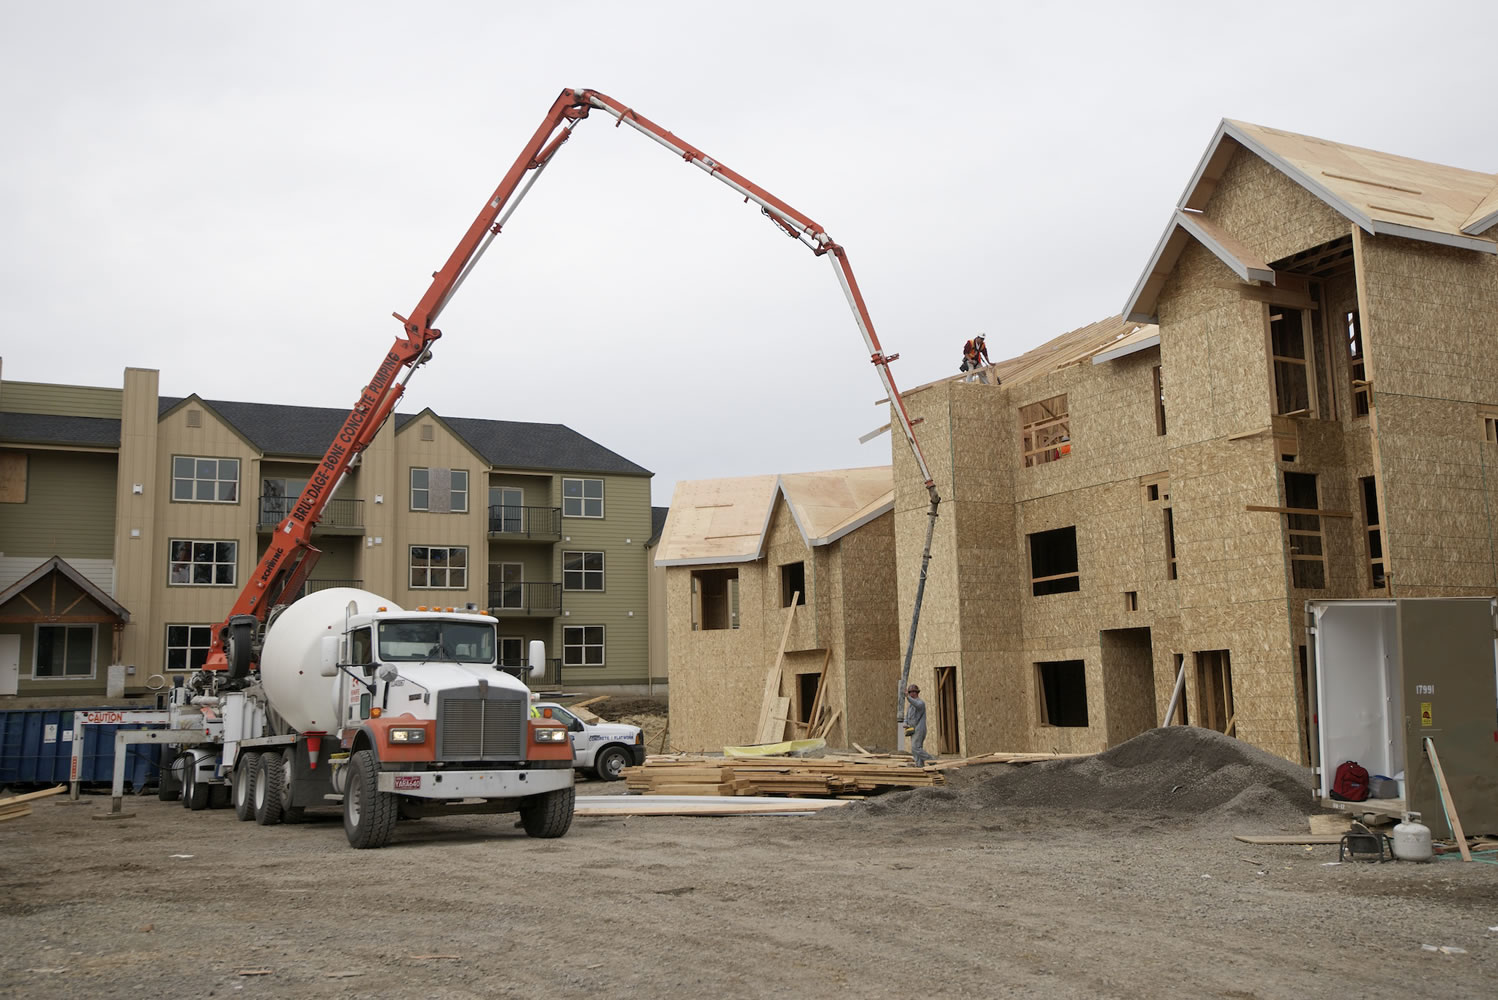 A Presto Homes worker builds a roof Tuesday at the Timbers at Towne Center in Hazel Dell.